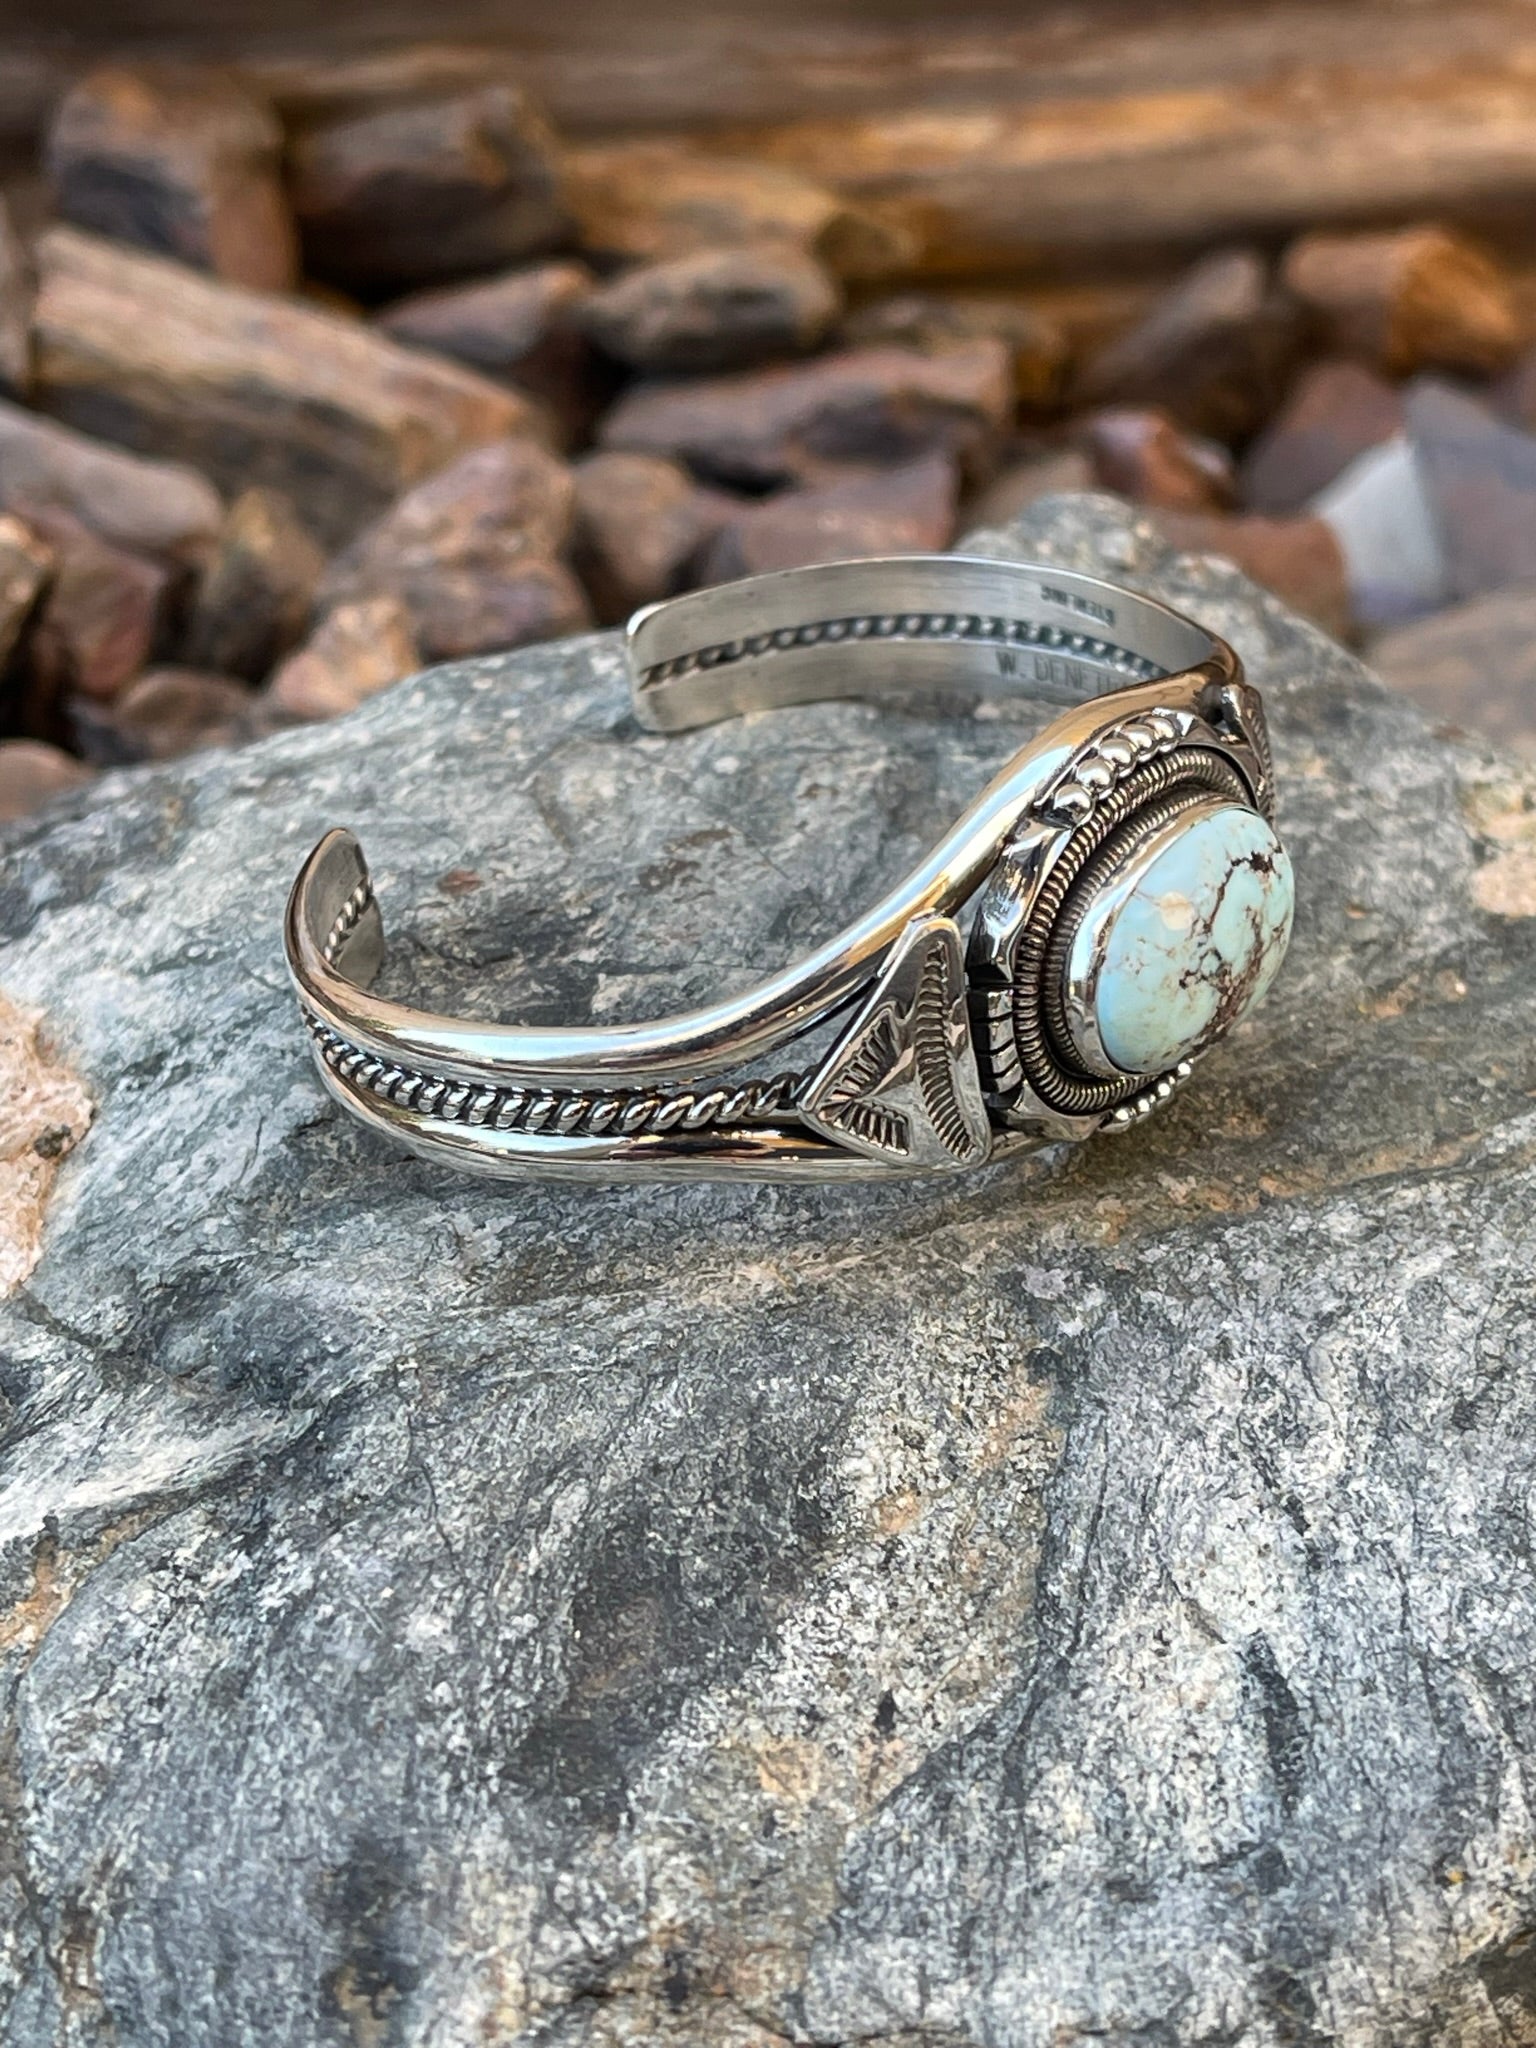 Handmade Sterling Silver Dry Creek Turquoise Bracelet with Coil Detail